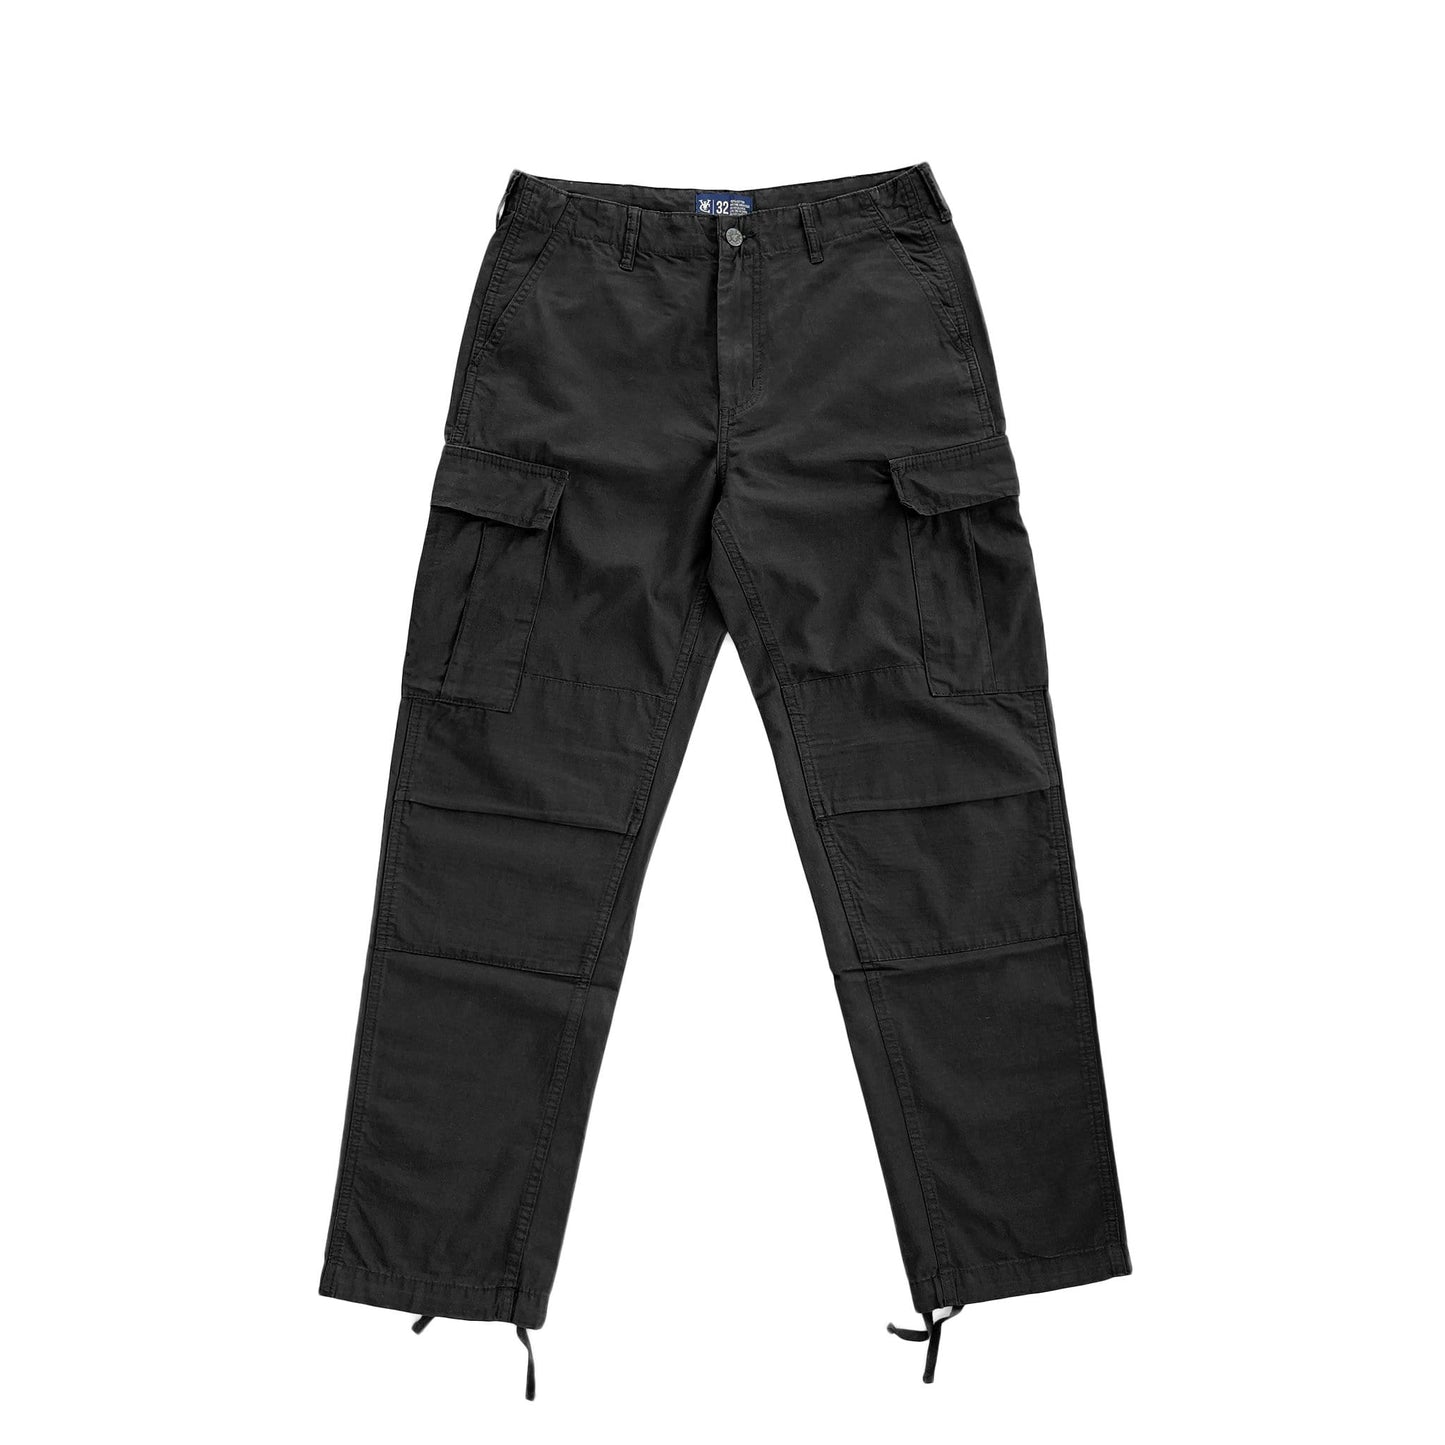 Premium quality ripstop cargo pants in black by New Zealand skate and streetwear clothing label VIC Apparel. American classic vintage military workwear style.